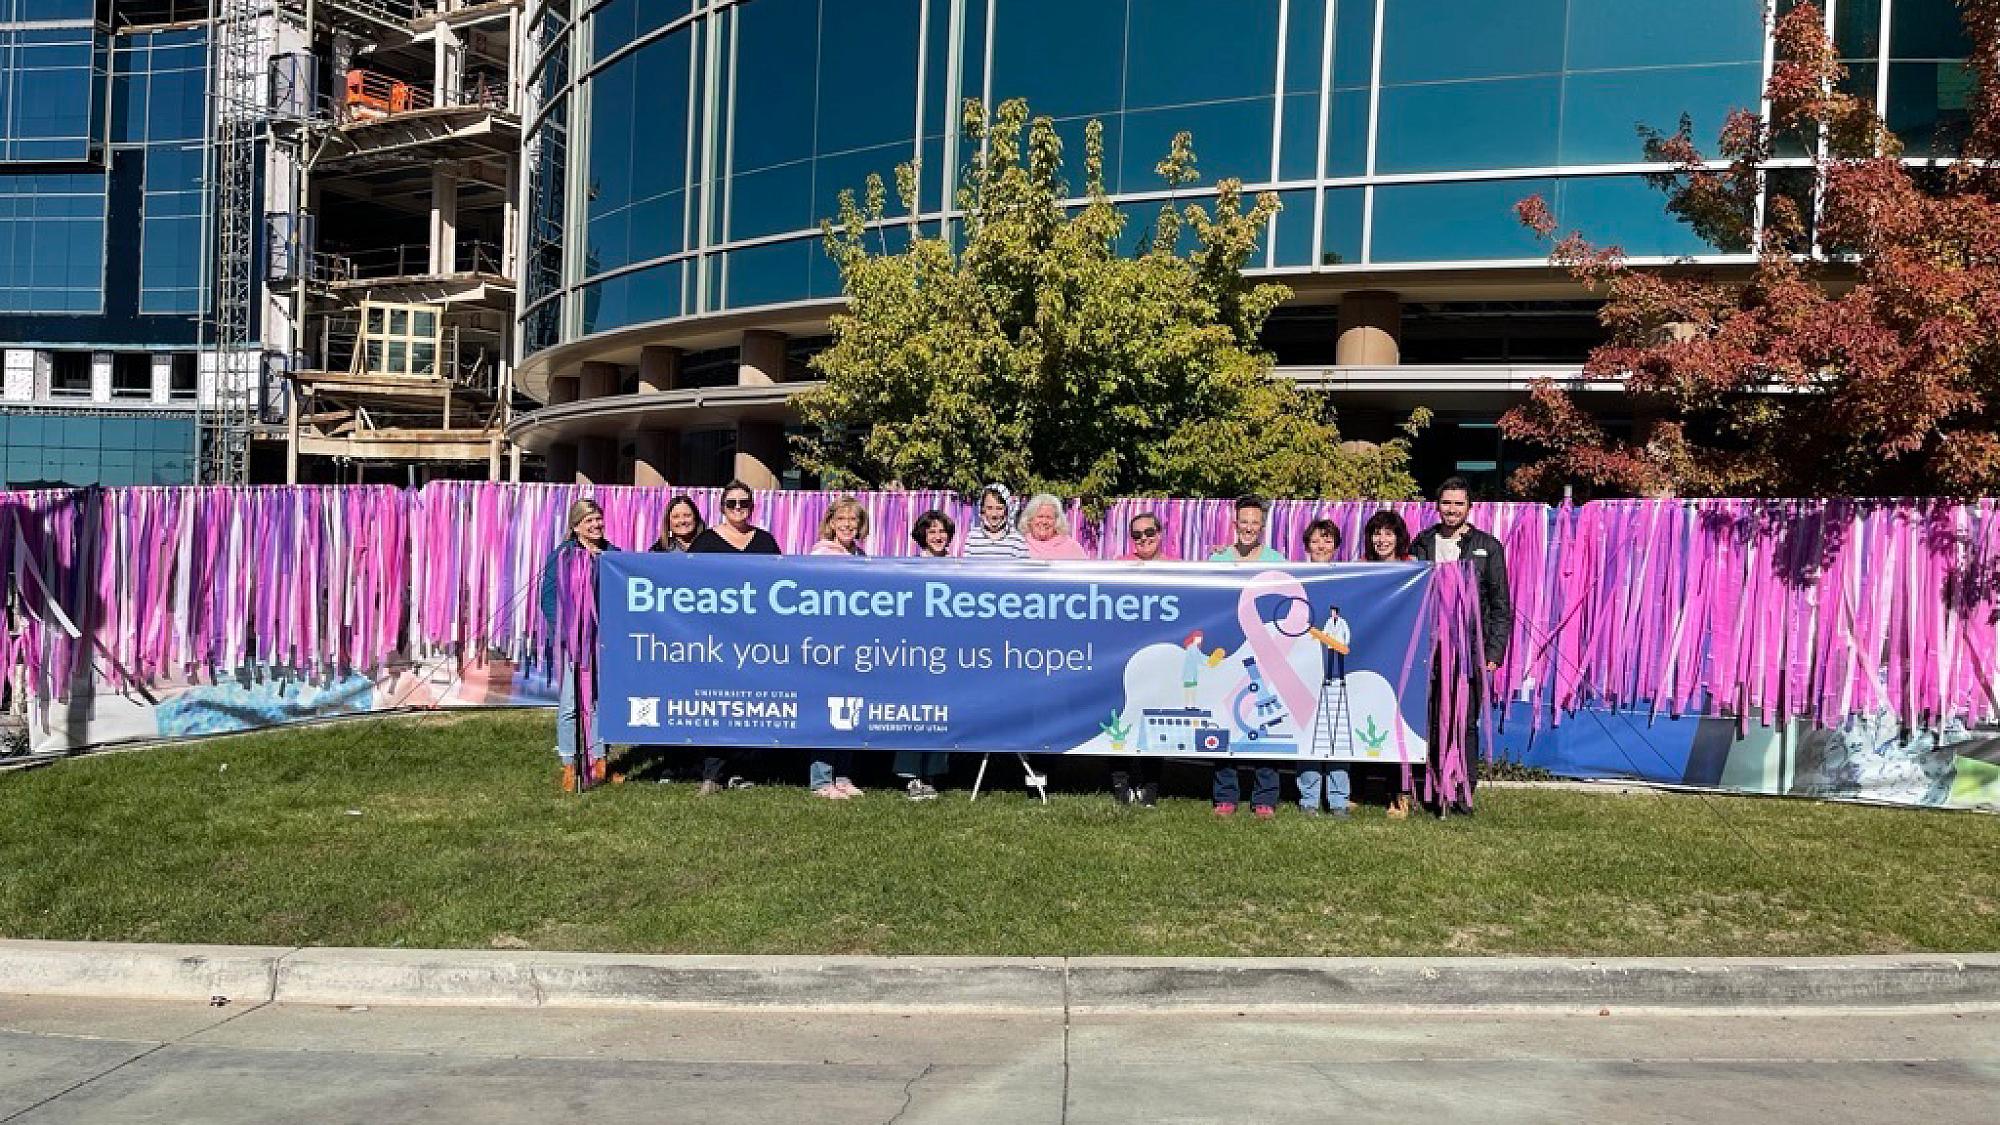 Advocates initiated an art installation of ribbons along the fence outside Huntsman Cancer Institute - Cancer Hospital South during national breast cancer awareness month to thank researchers for giving patients hope.